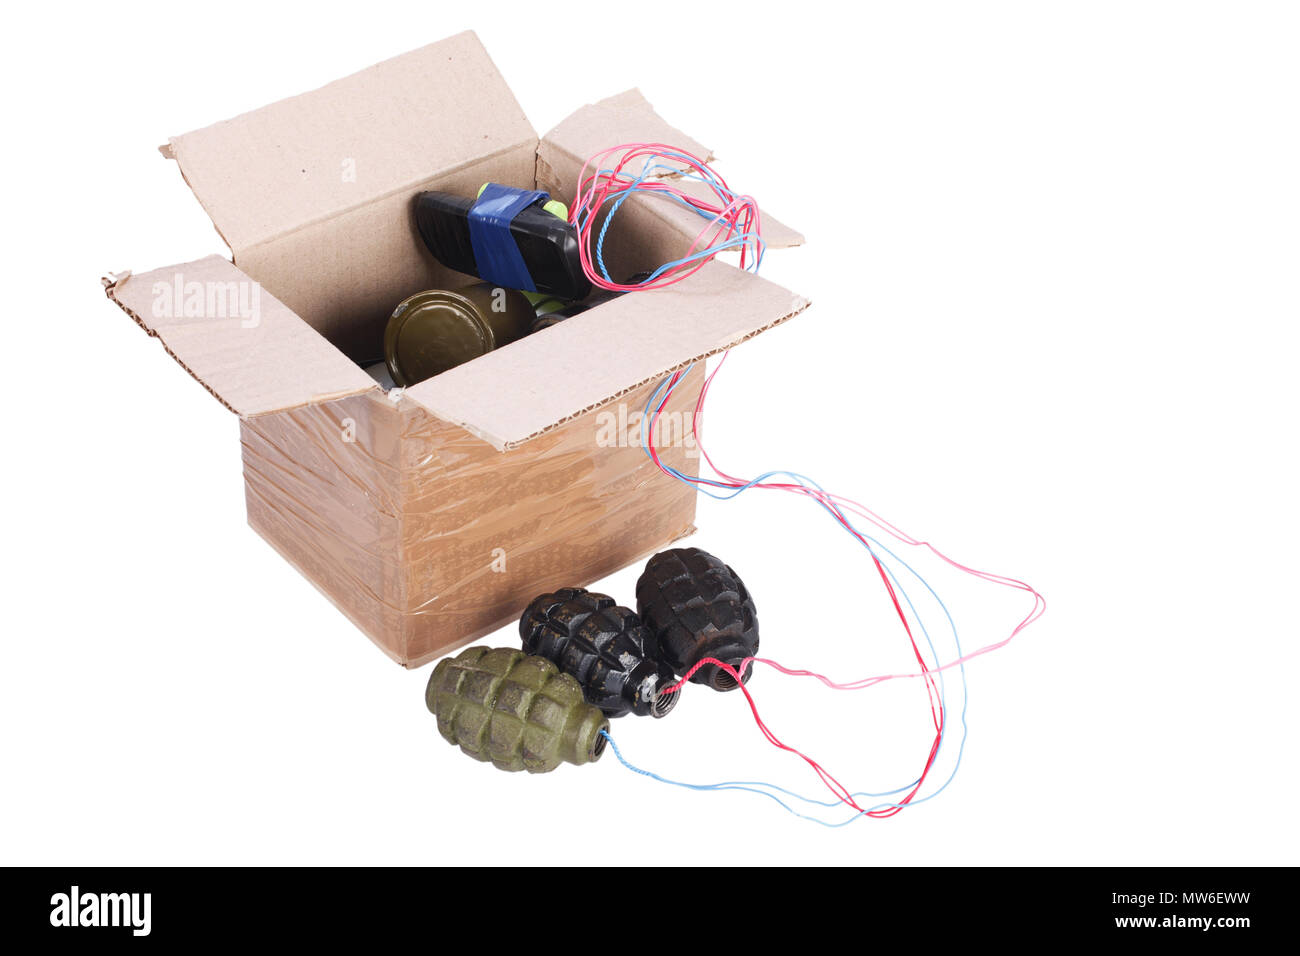 Mailbomb IED - Improvised Explosive Device in mailbox isolated on white Stock Photo